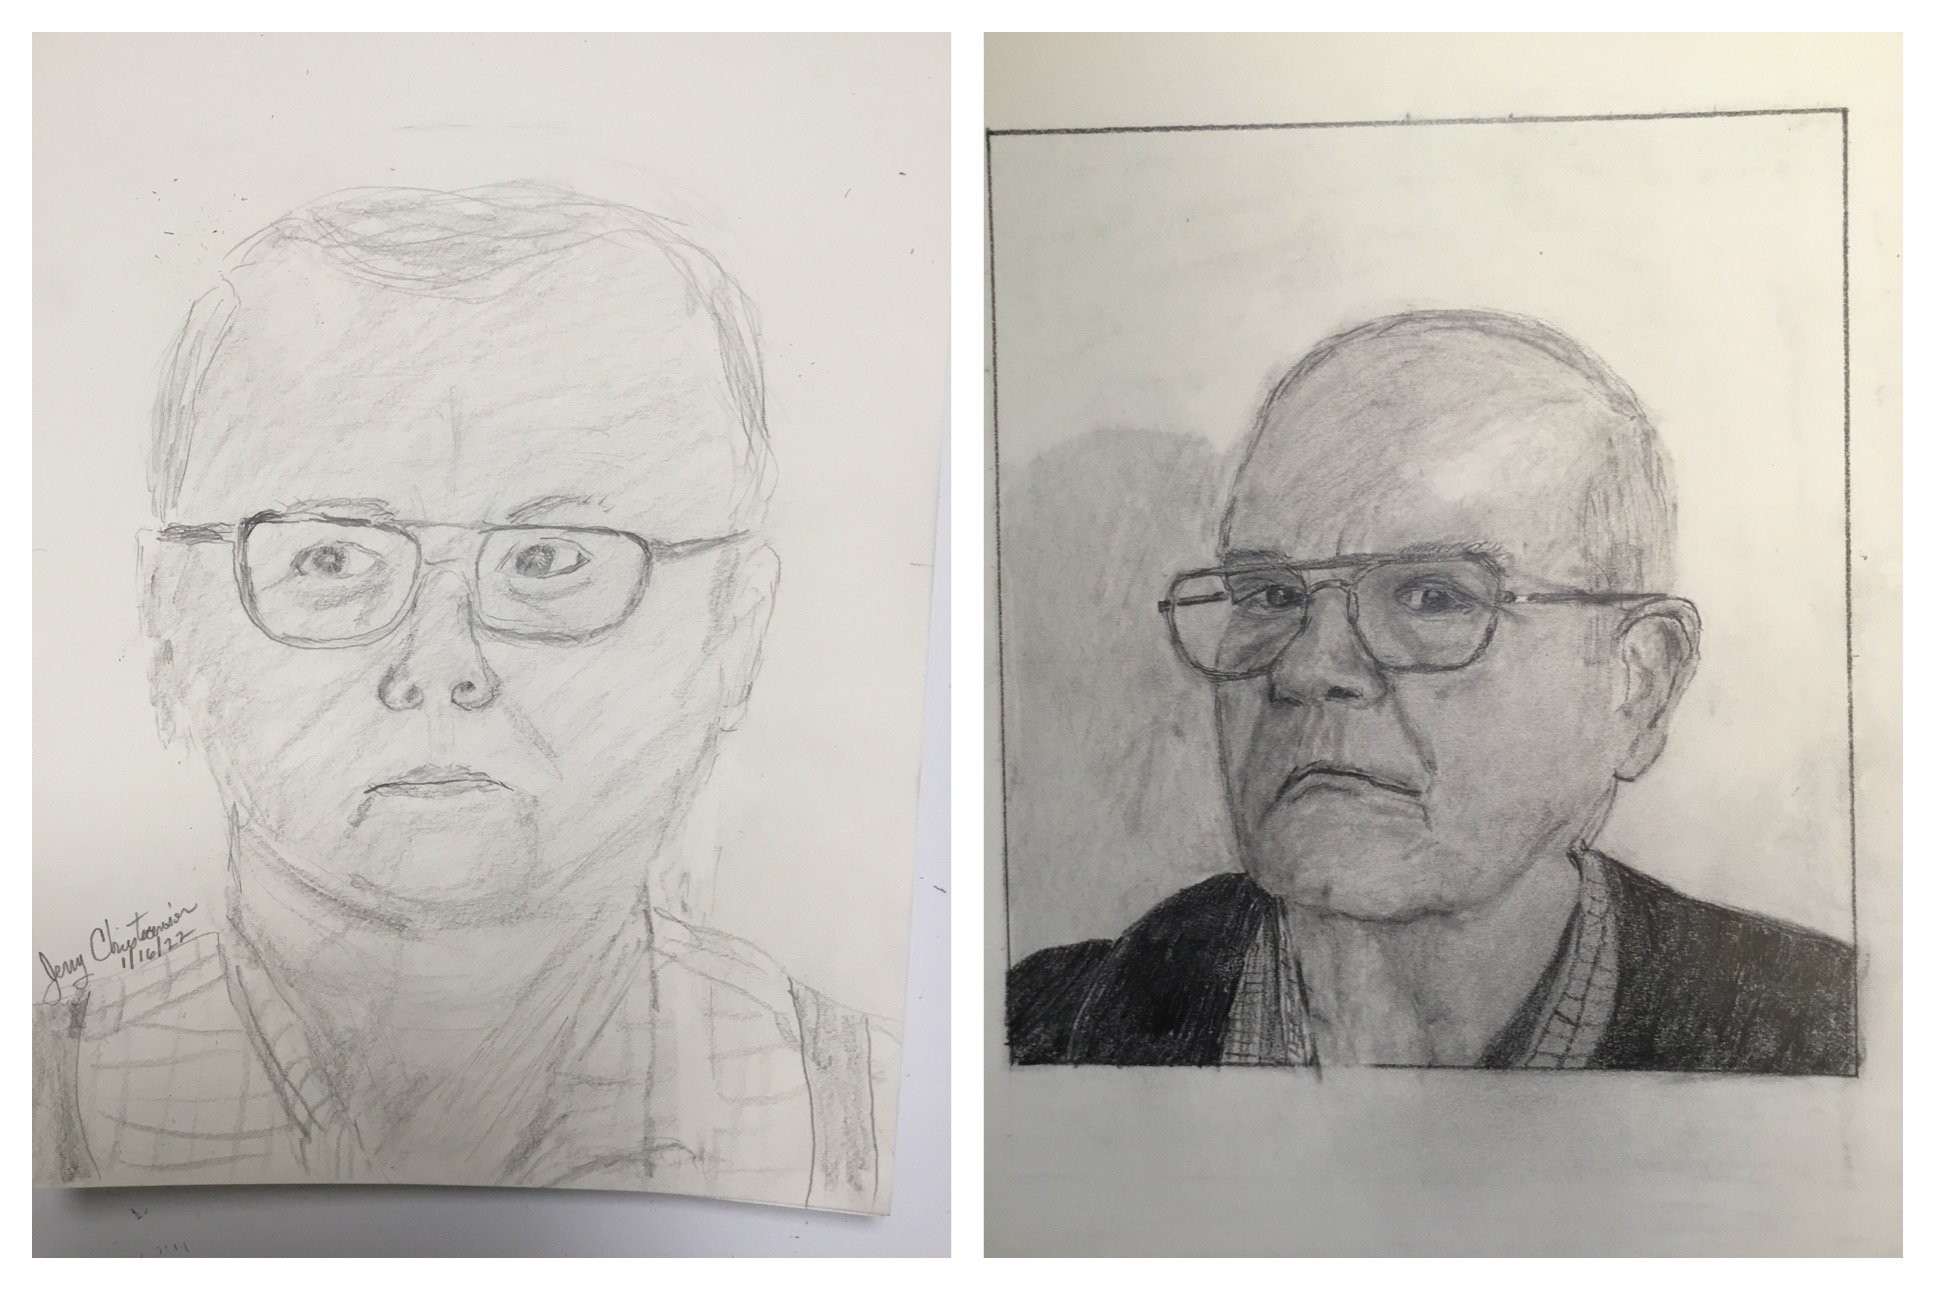 Jerry C's Before and After Drawings January 17-22, 2022